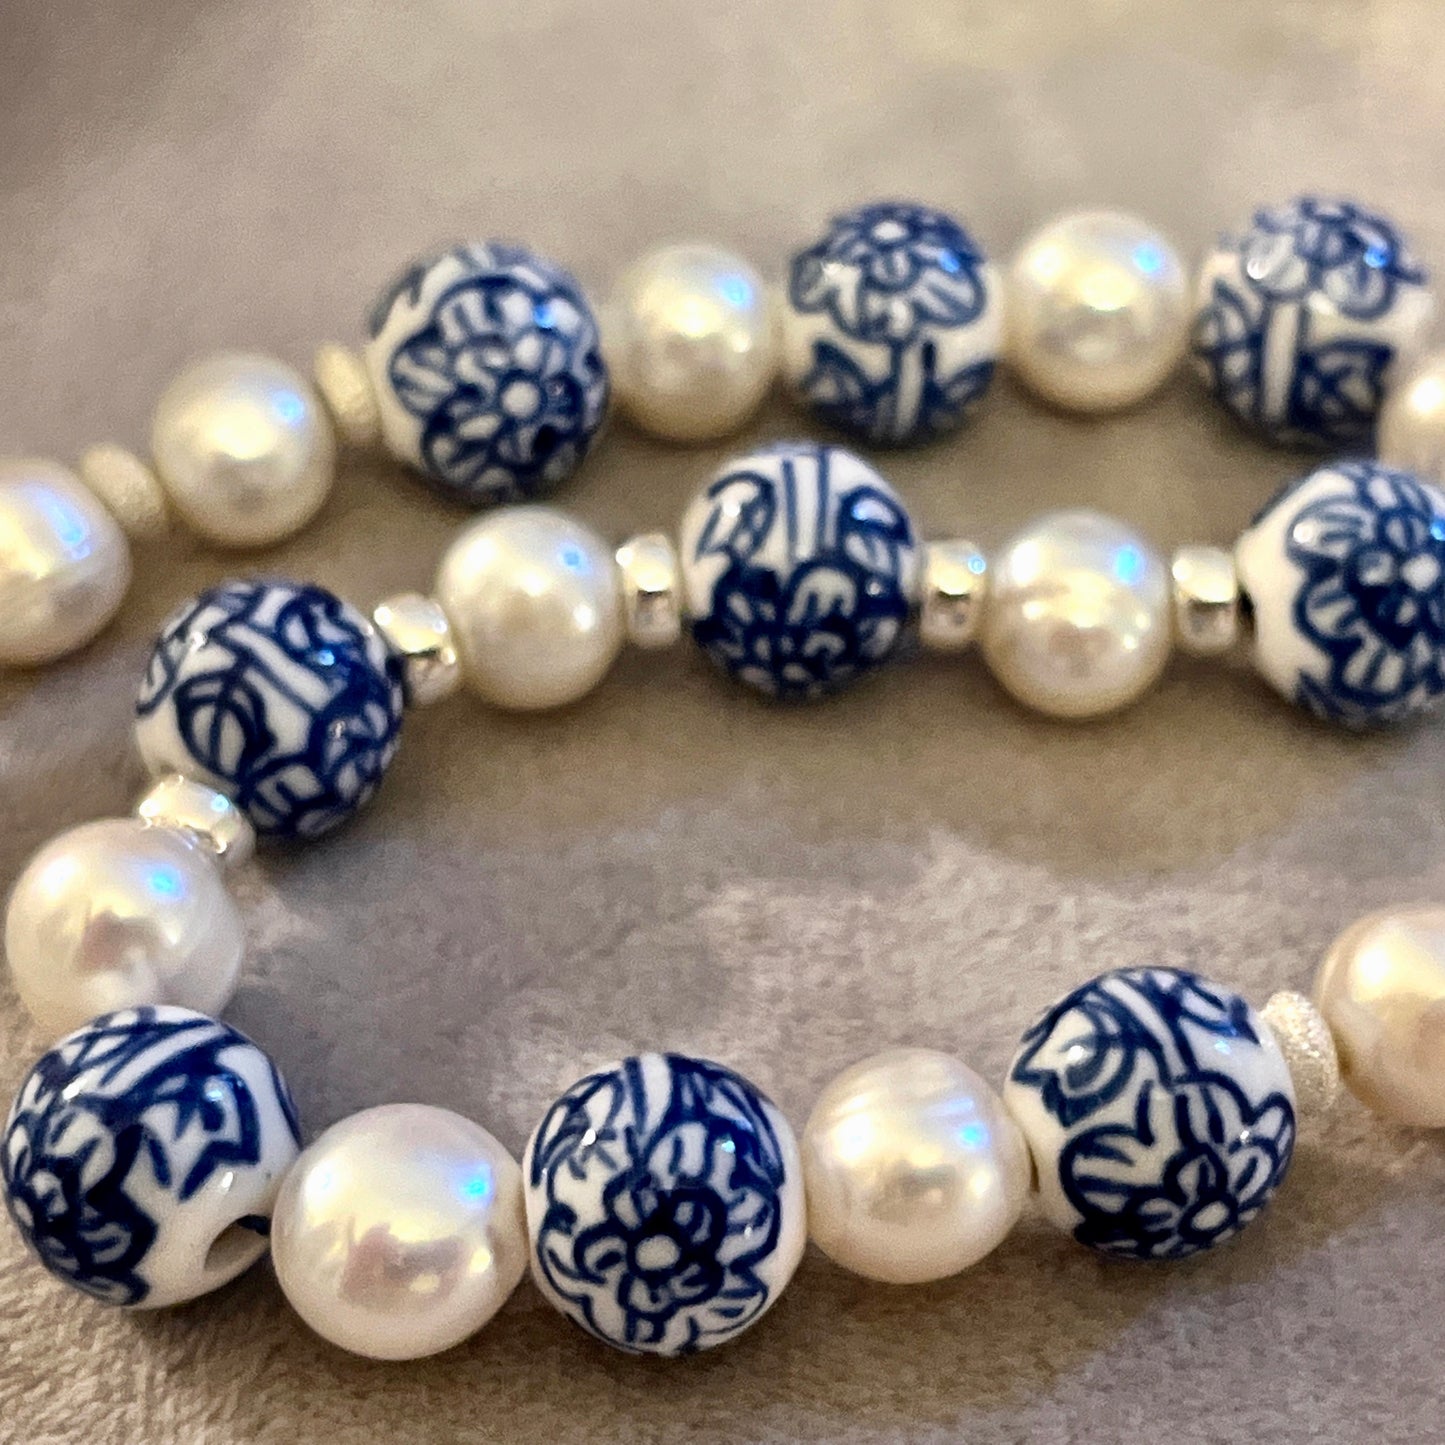 Pearl and ceramic bead necklace